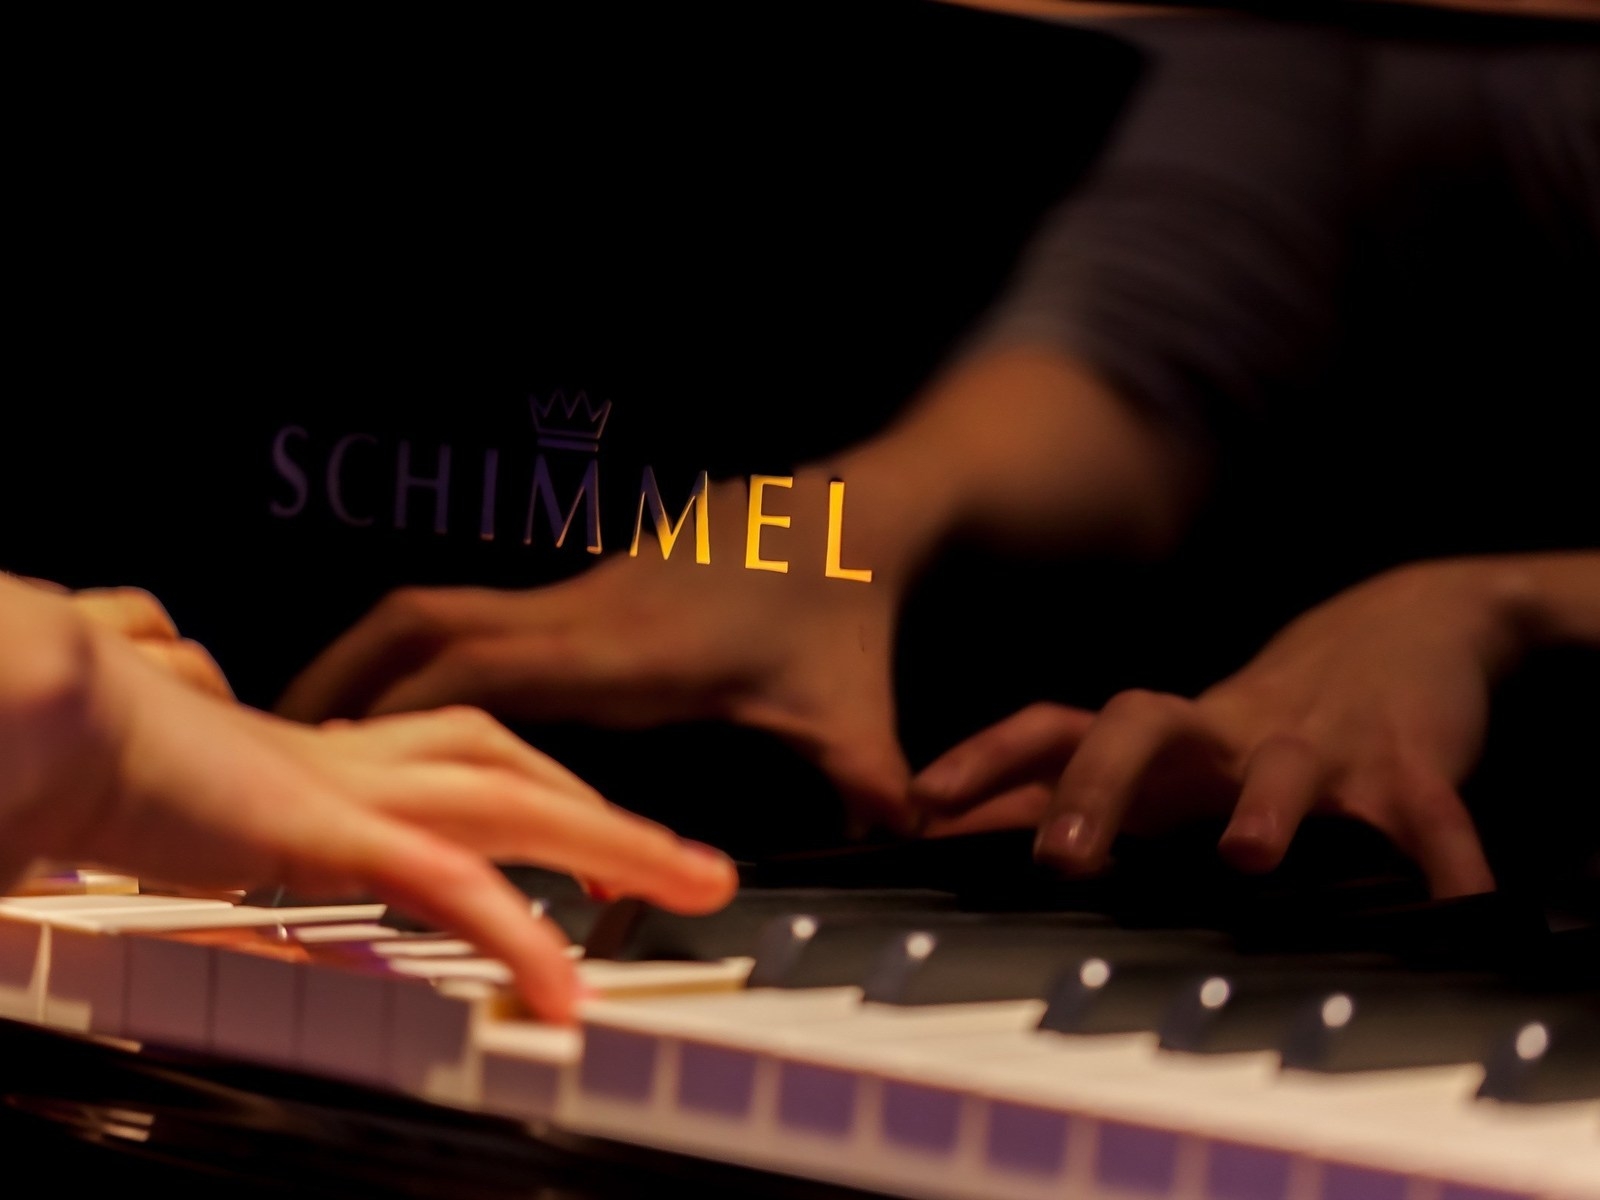 Schimmel Piano for 1600 x 1200 resolution